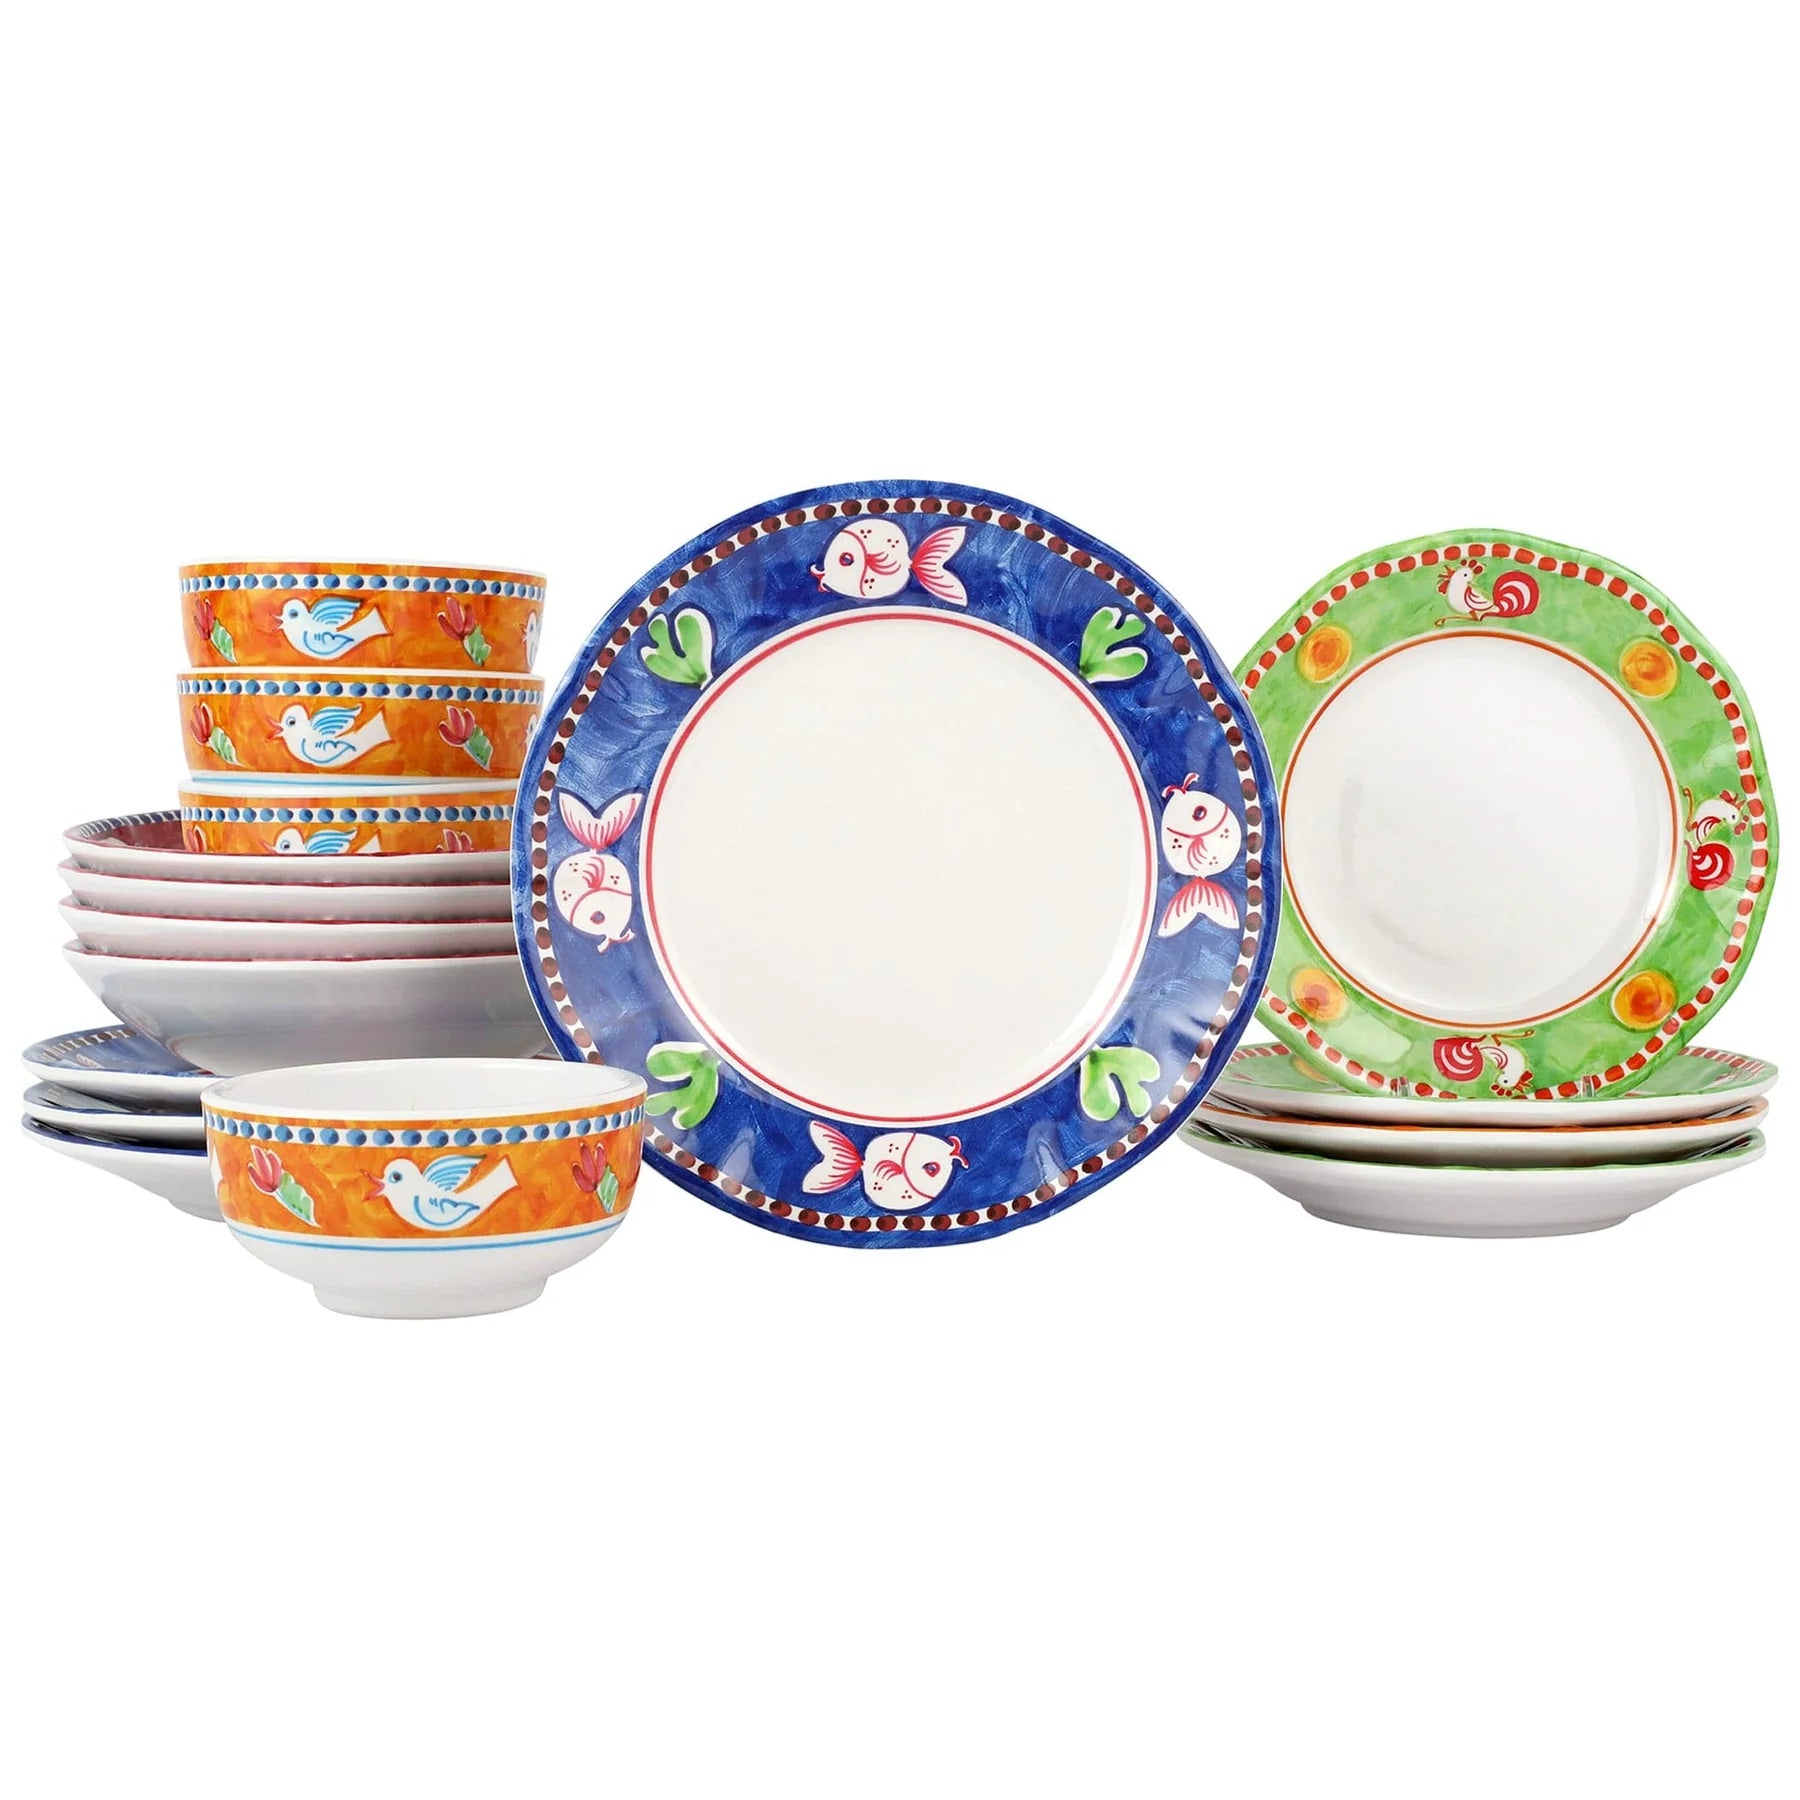 Melamine Campagna Asst 16-Pce Place Setting